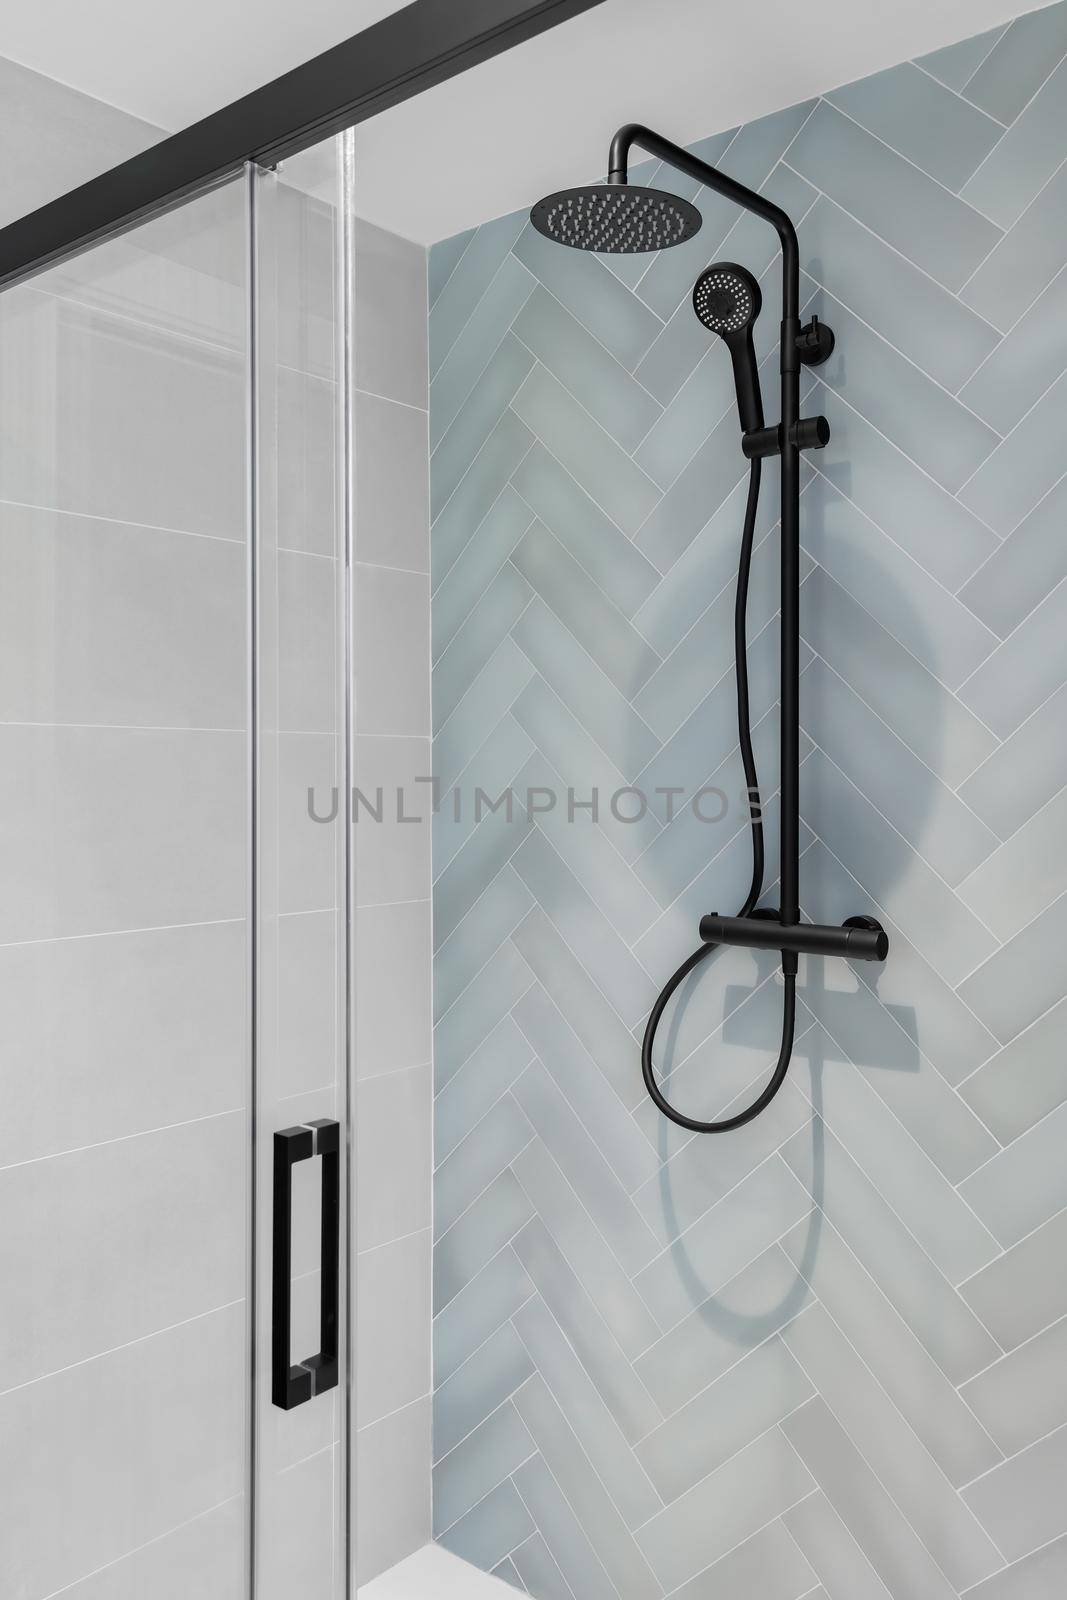 Modern shower zone with rain head, hand held shower and glass door. Light blue and white tiles in the bathroom.